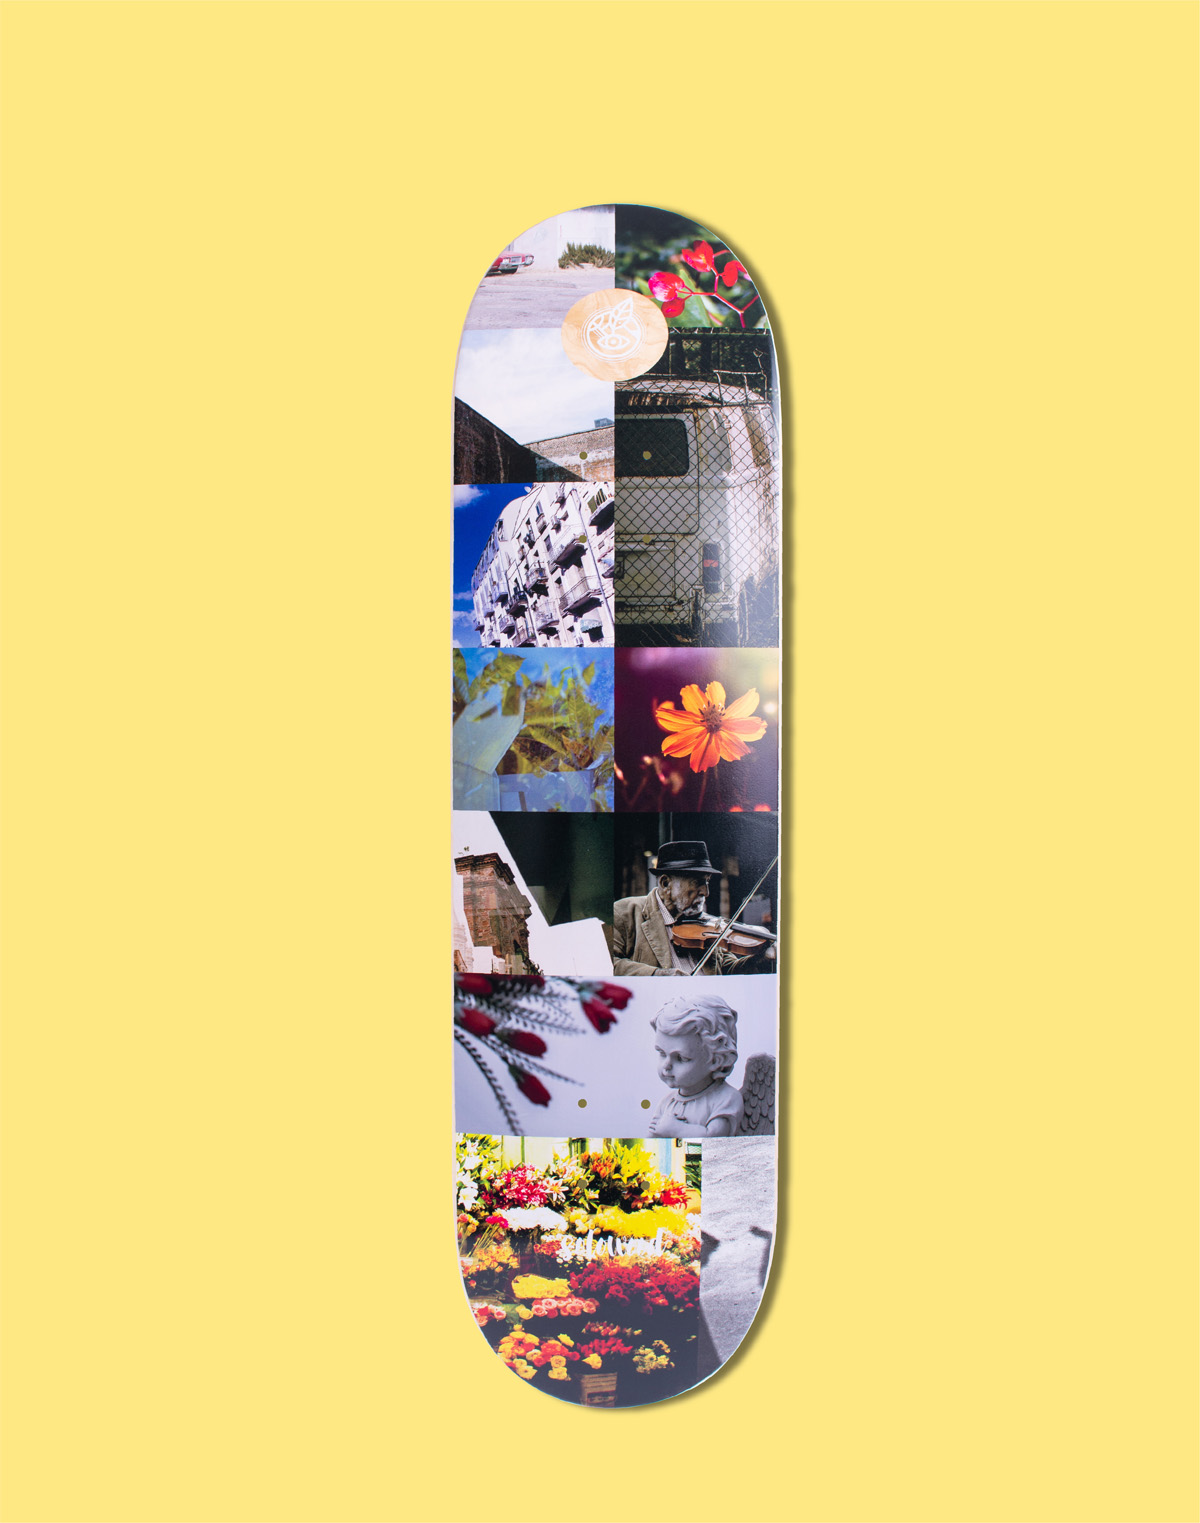 Collage Photo Series By Solowood Skateboards 7